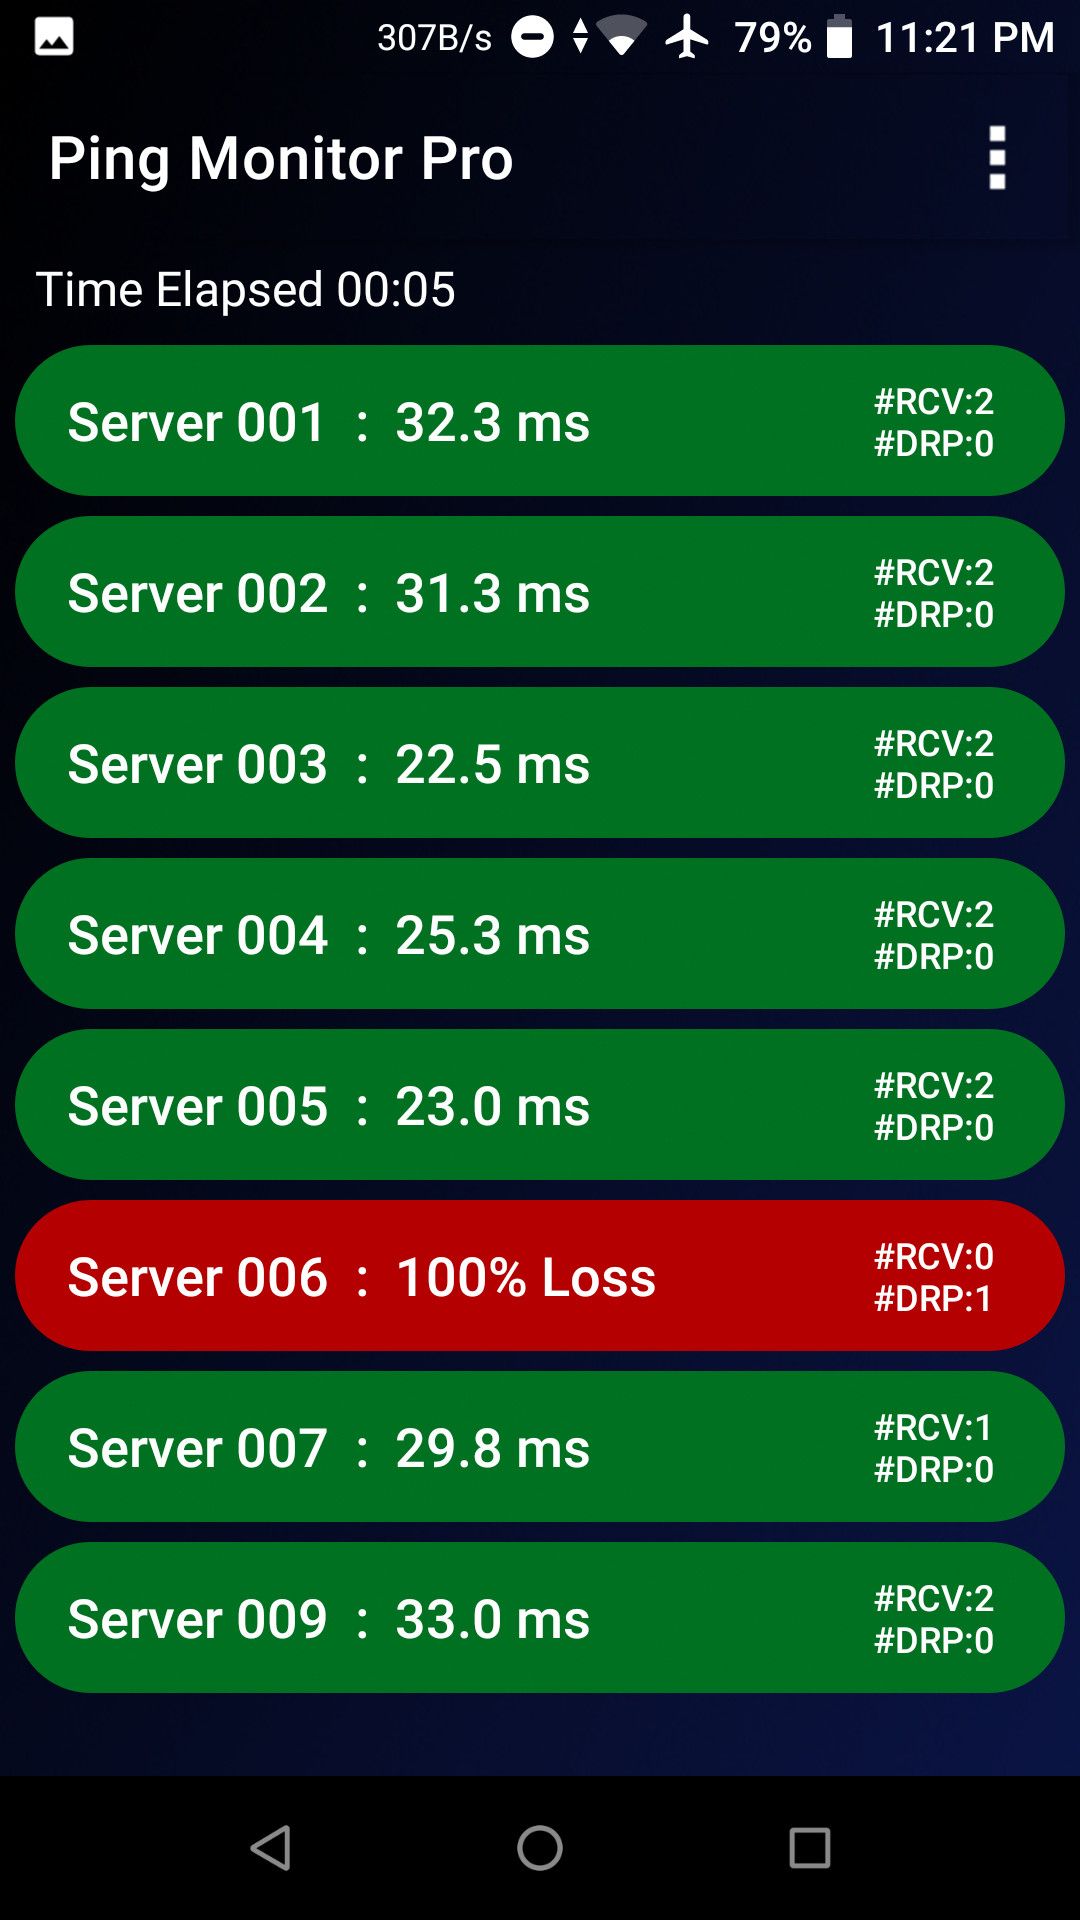 Ping monitor pro showing unavailability of a machine